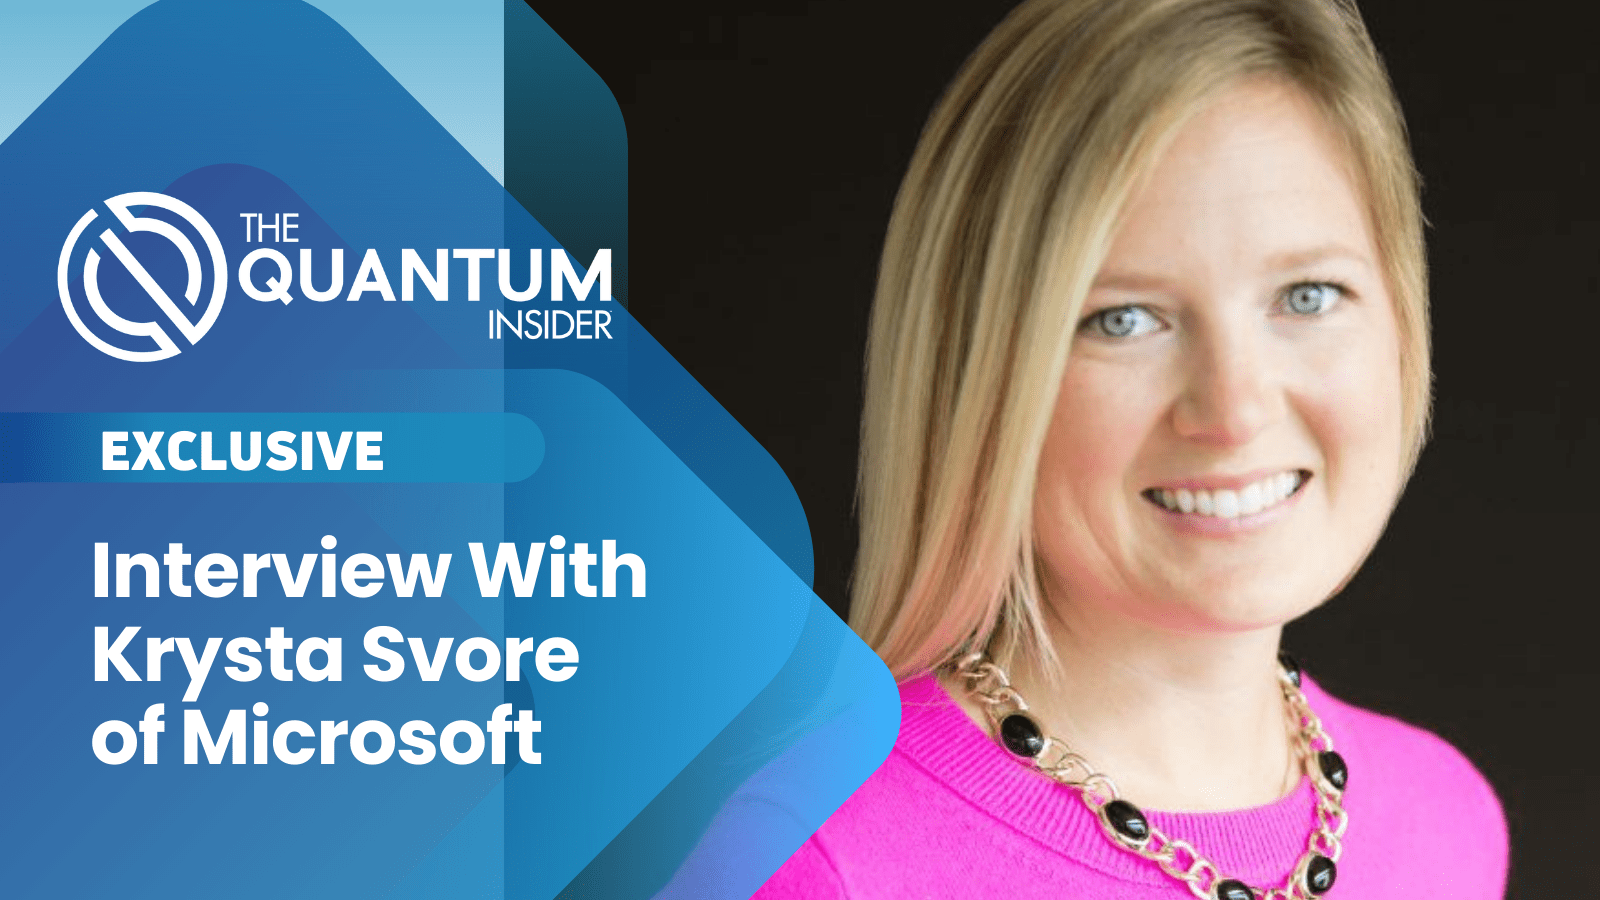 https://www.thequantuminsider.com/2022/06/07/tqi-exclusive-interview-with-krysta-svore-of-microsoft/